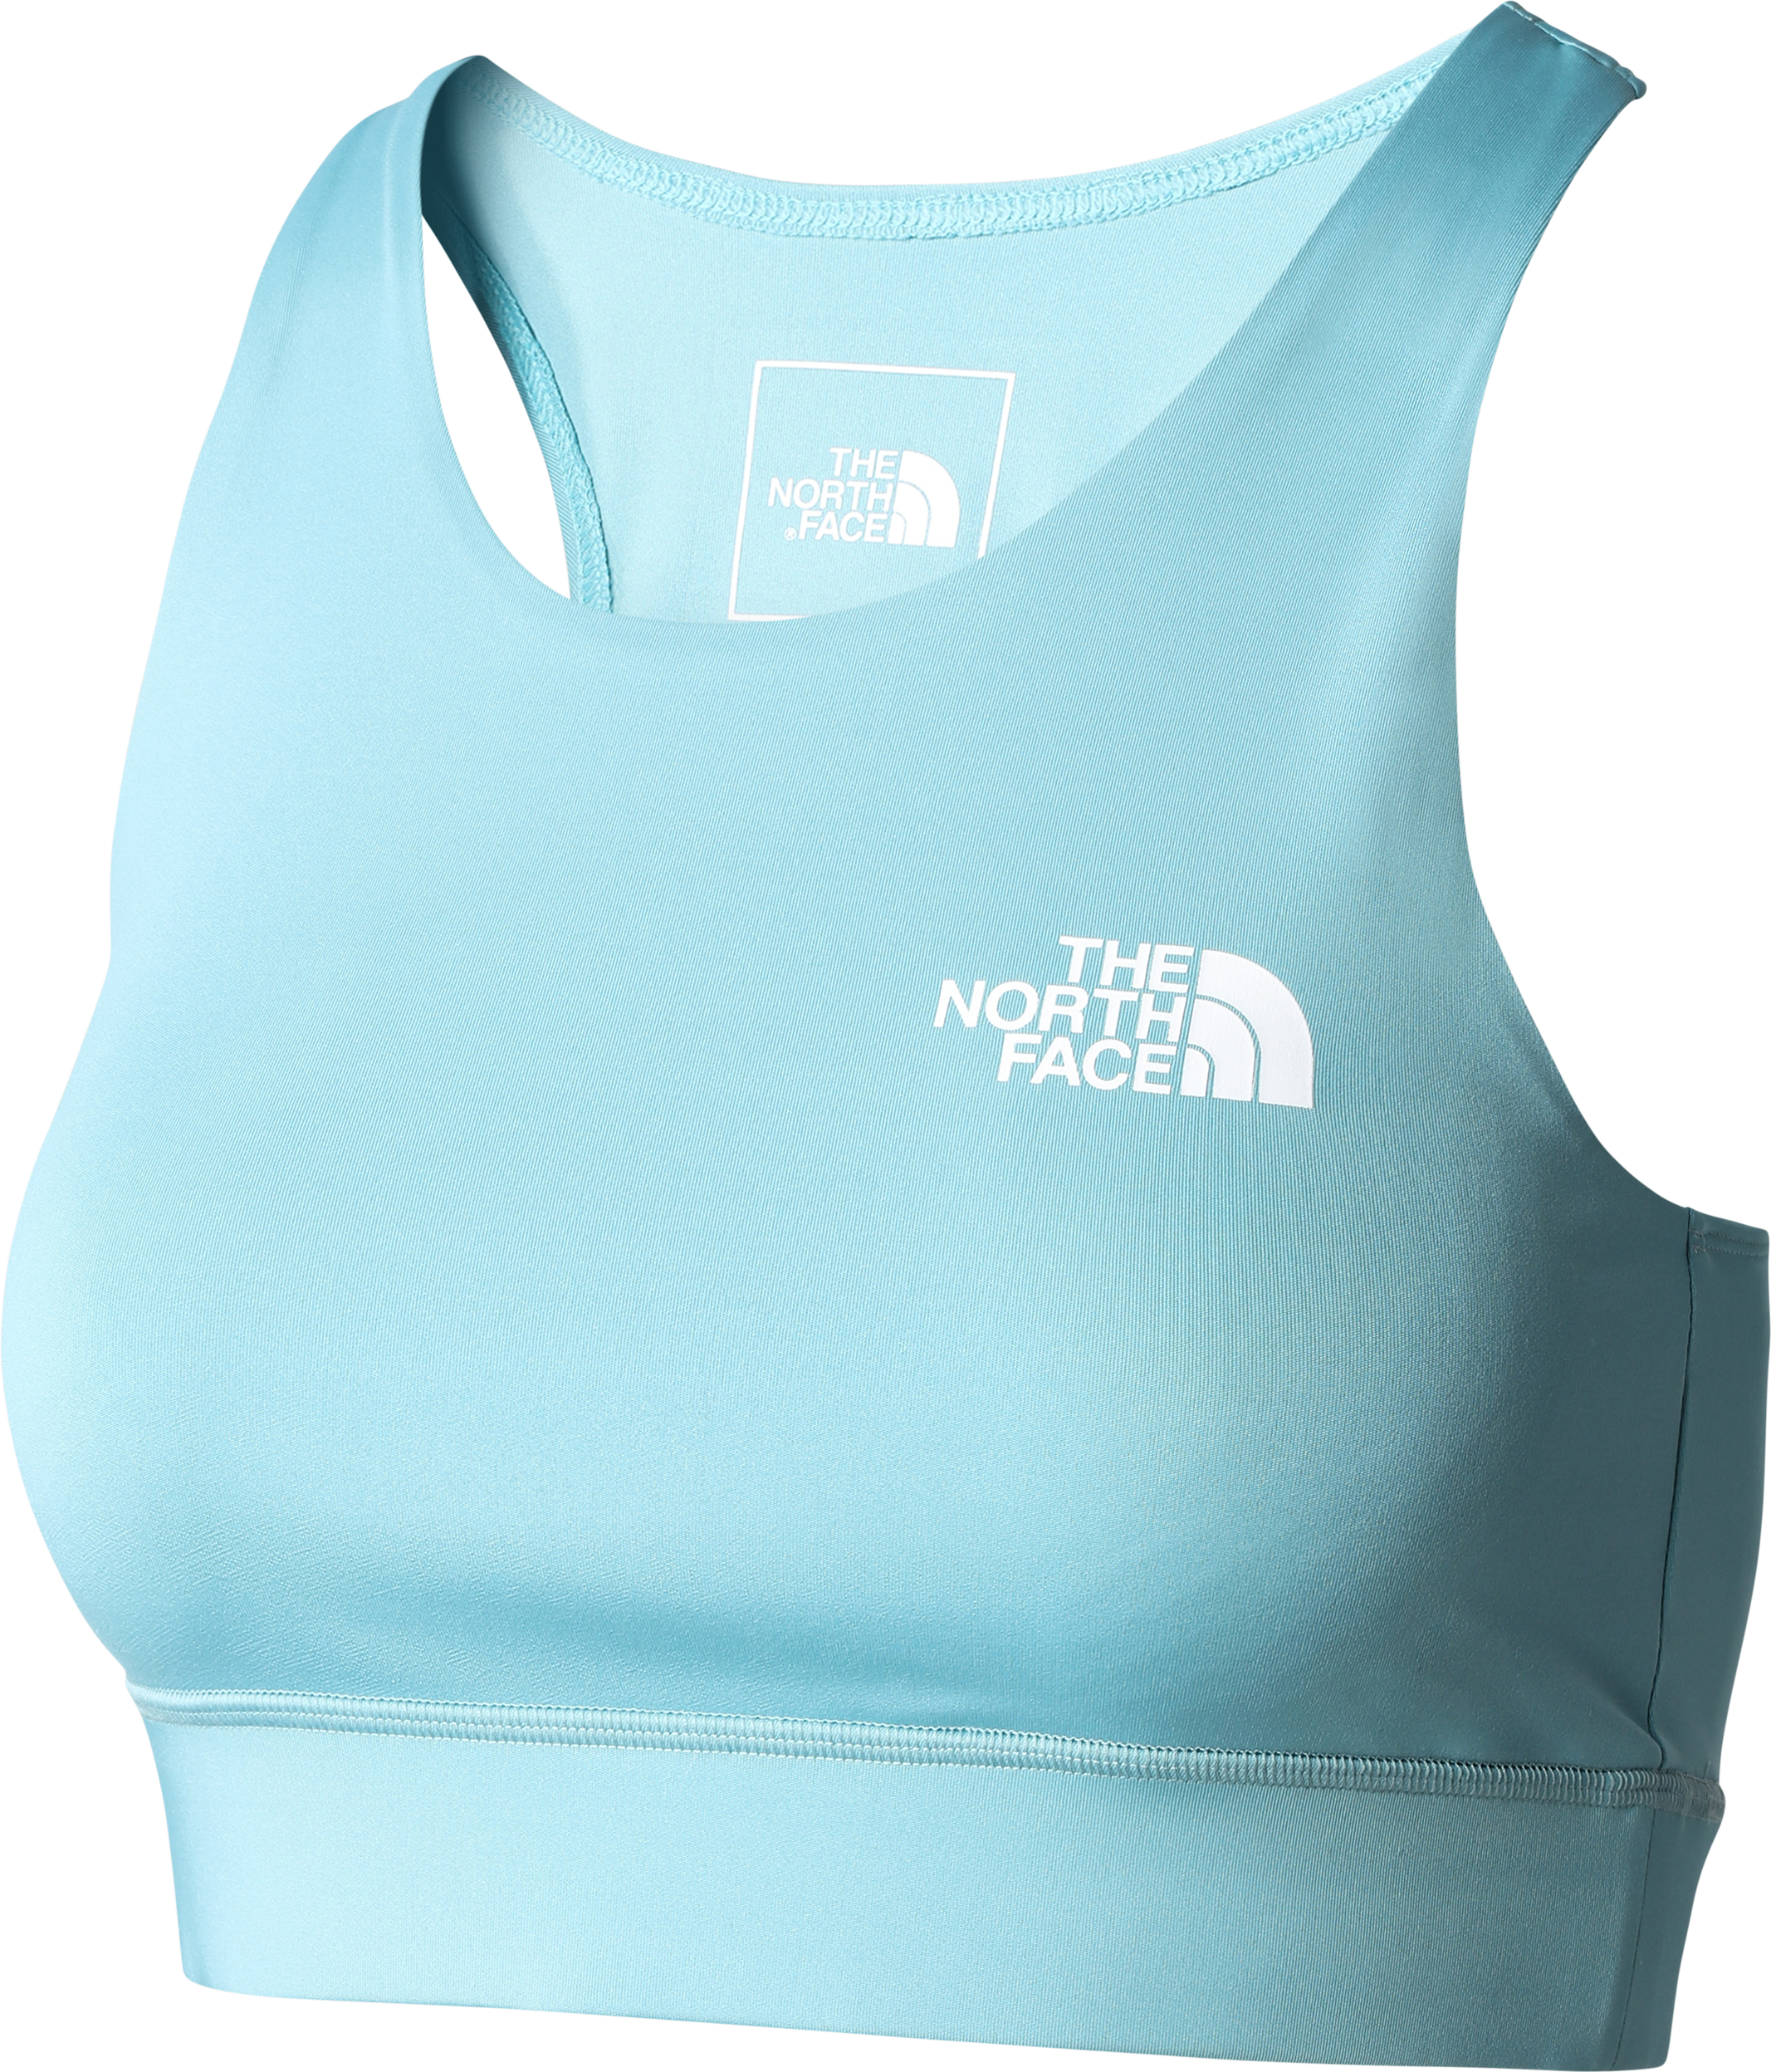 The North Face The North Face Women's Flex Bra Reef Waters S, REEF WATERS